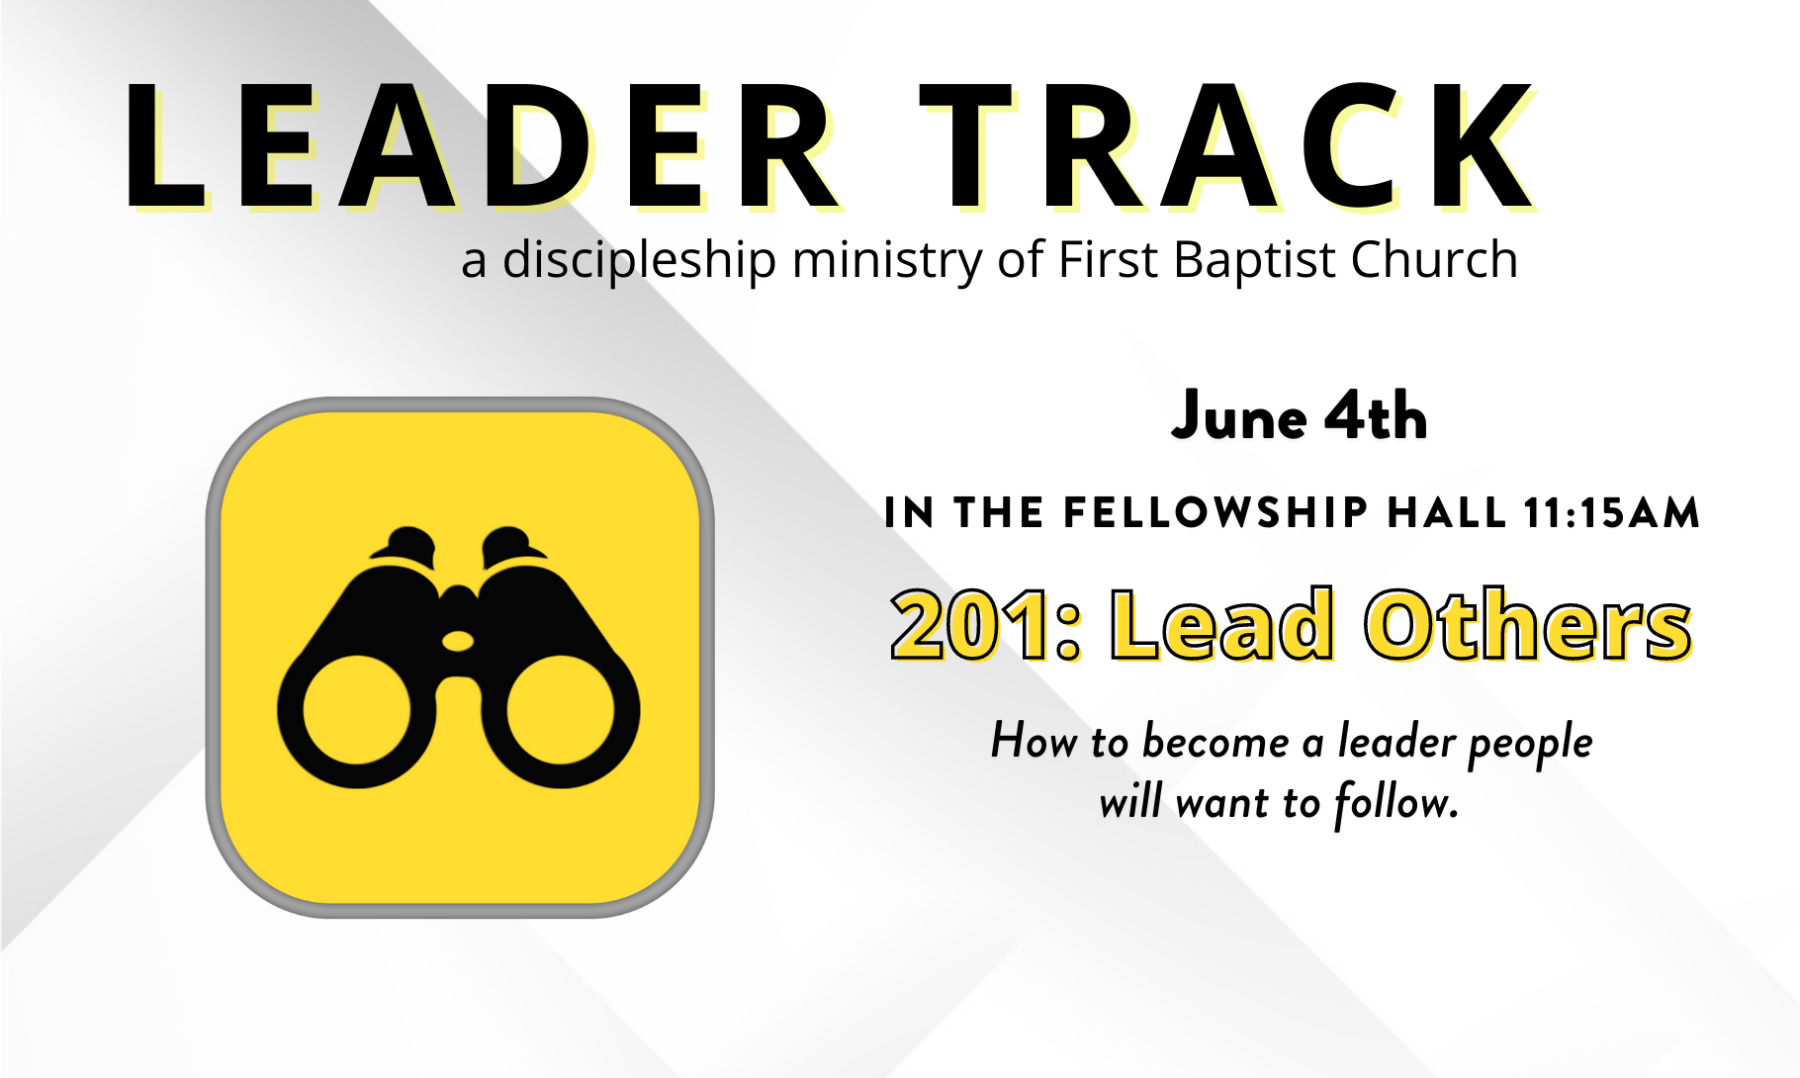 Leader Track 201: Lead Others